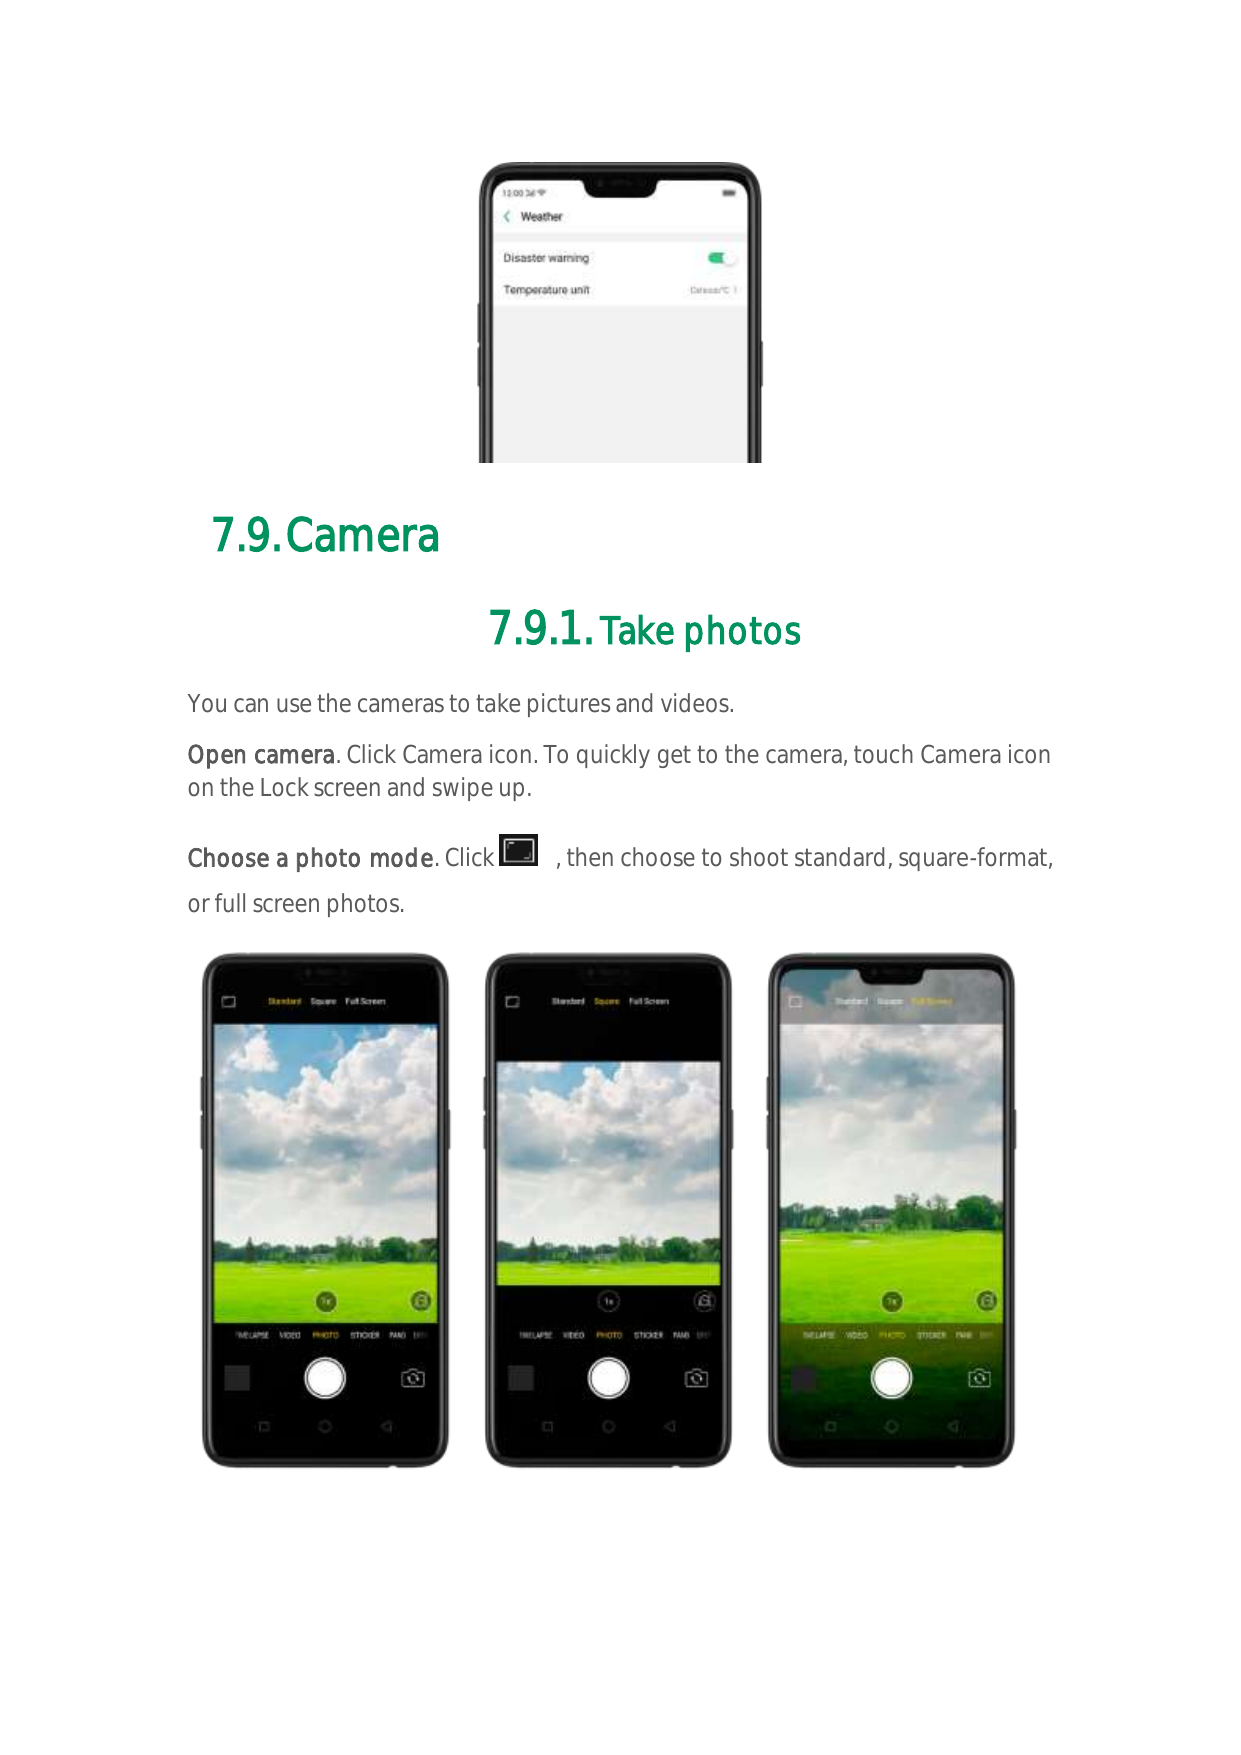 7.9. Camera7.9.1. Take photosYou can use the cameras to take pictures and videos.Open camera. Click Camera icon. To quickly get 